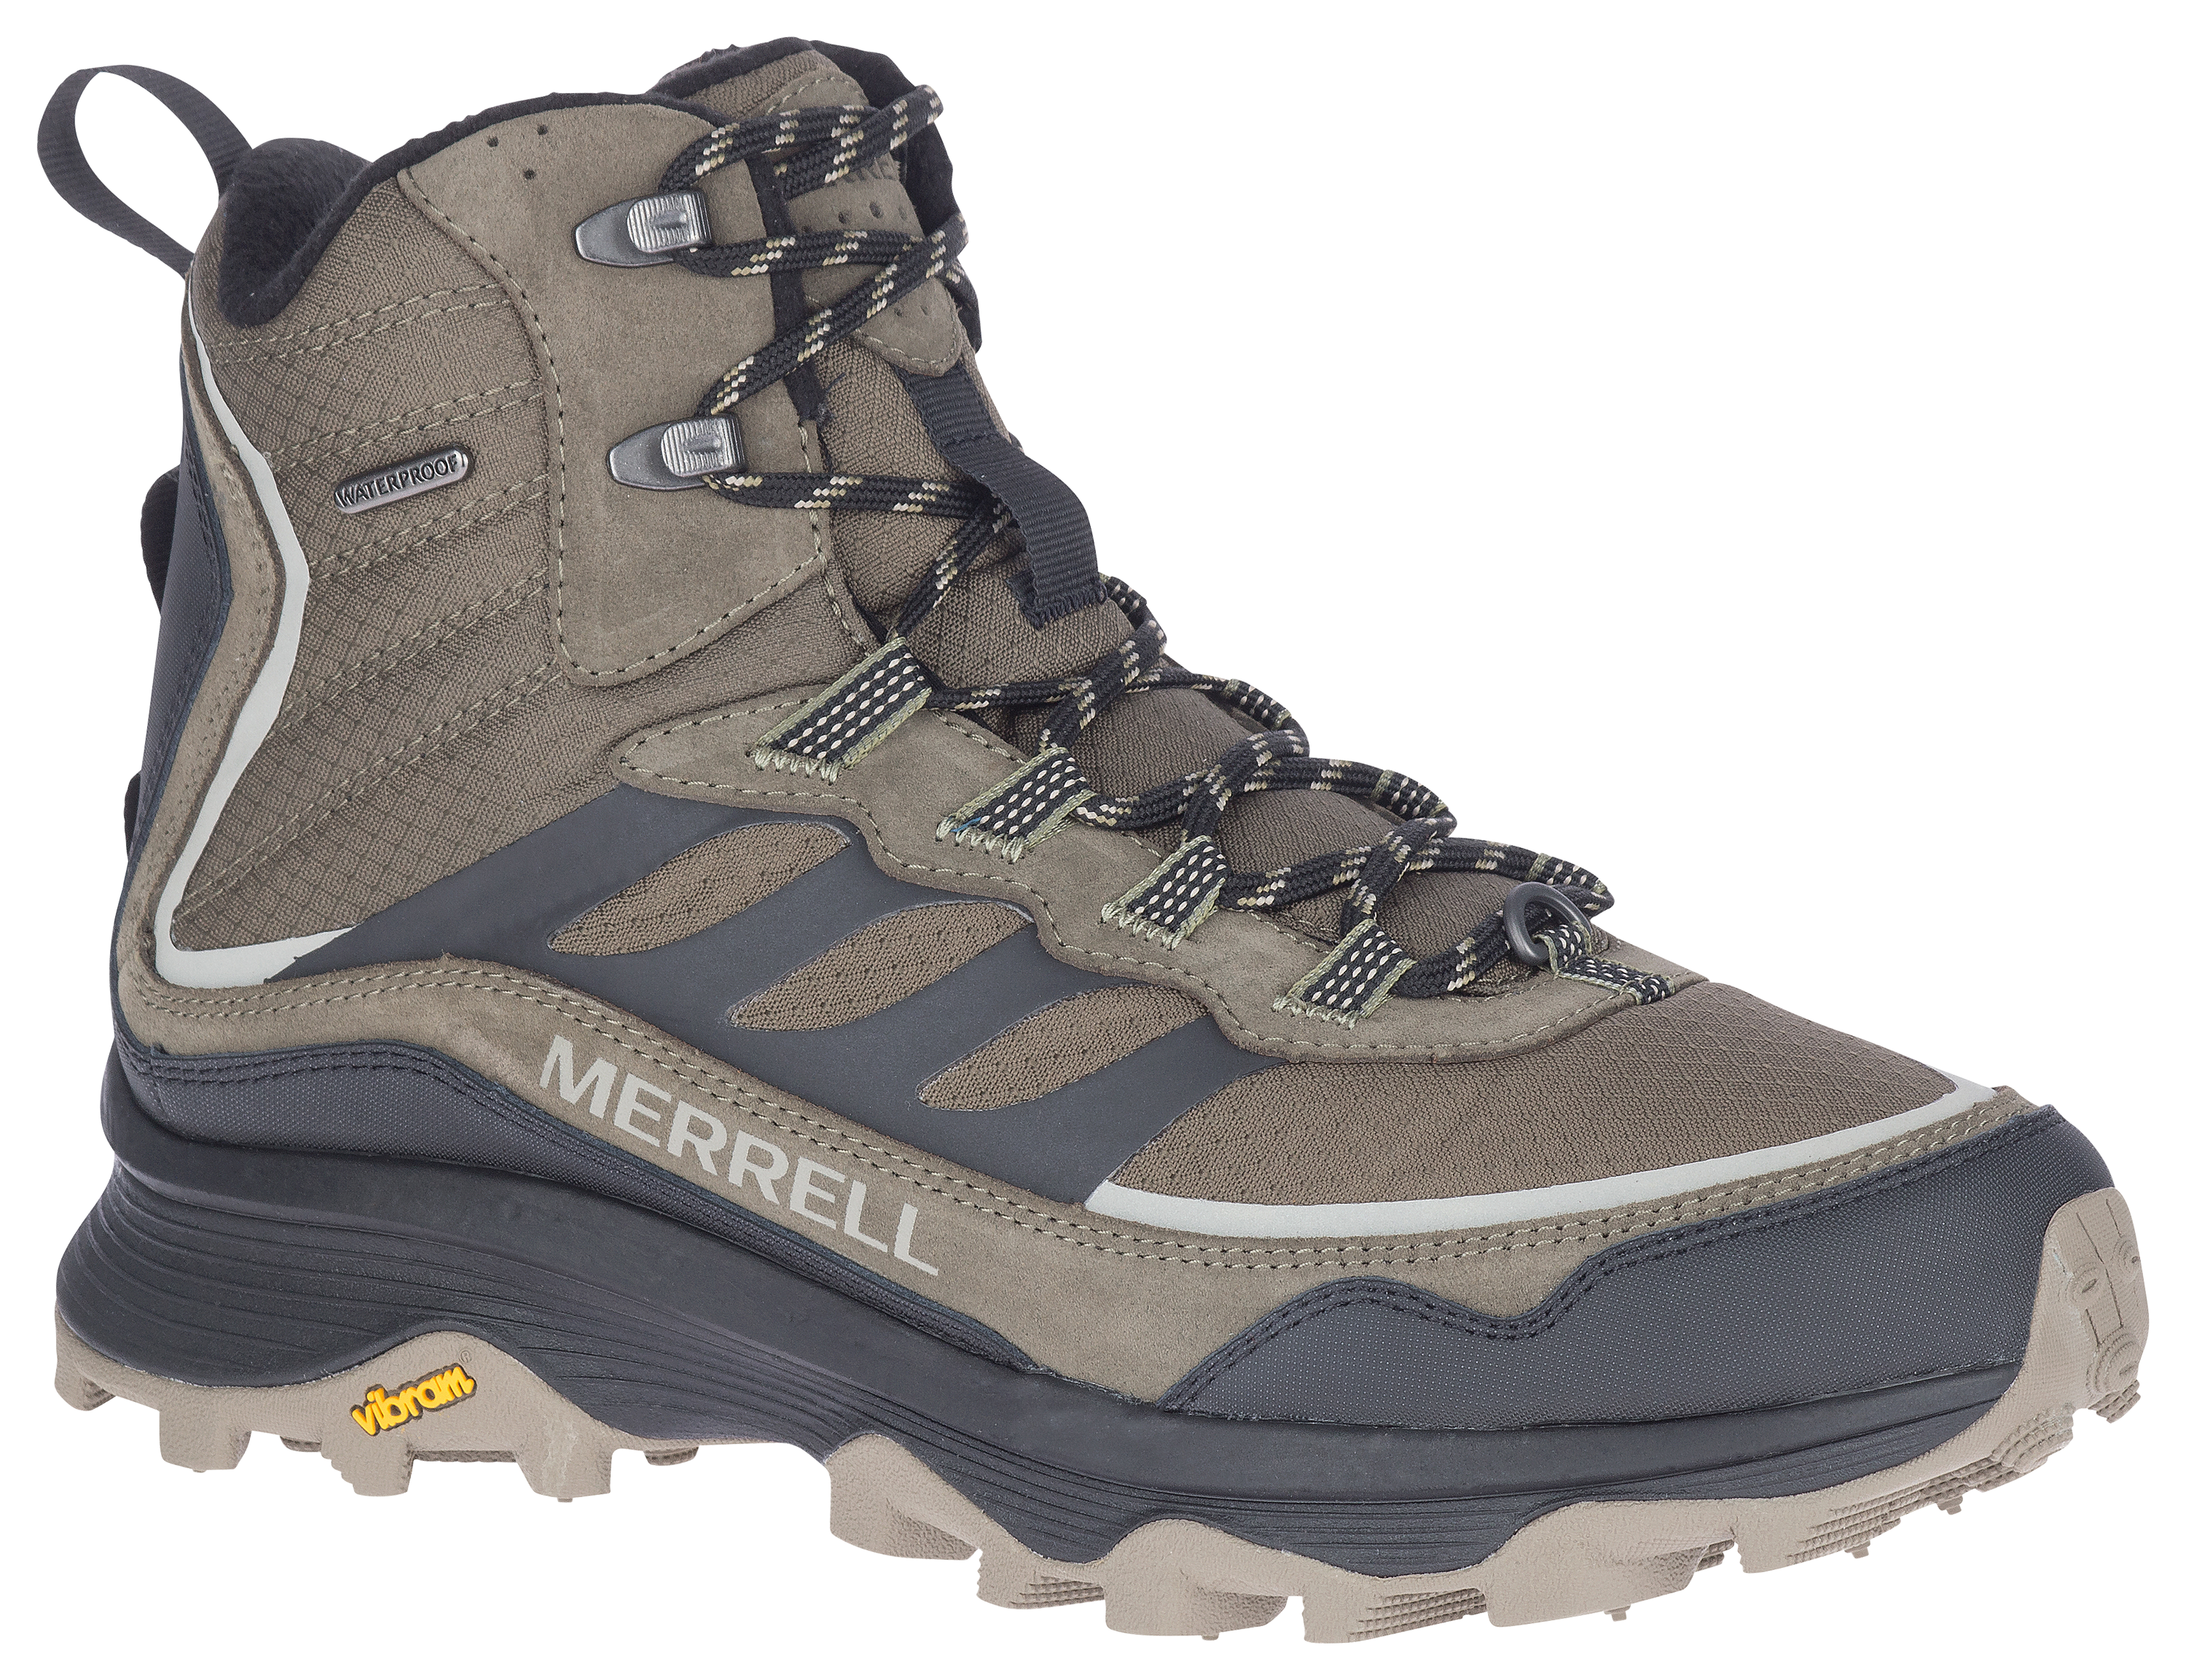 Merrell Moab Speed Thermo Mid Waterproof Hiking Shoes for Men - Olive - 8M